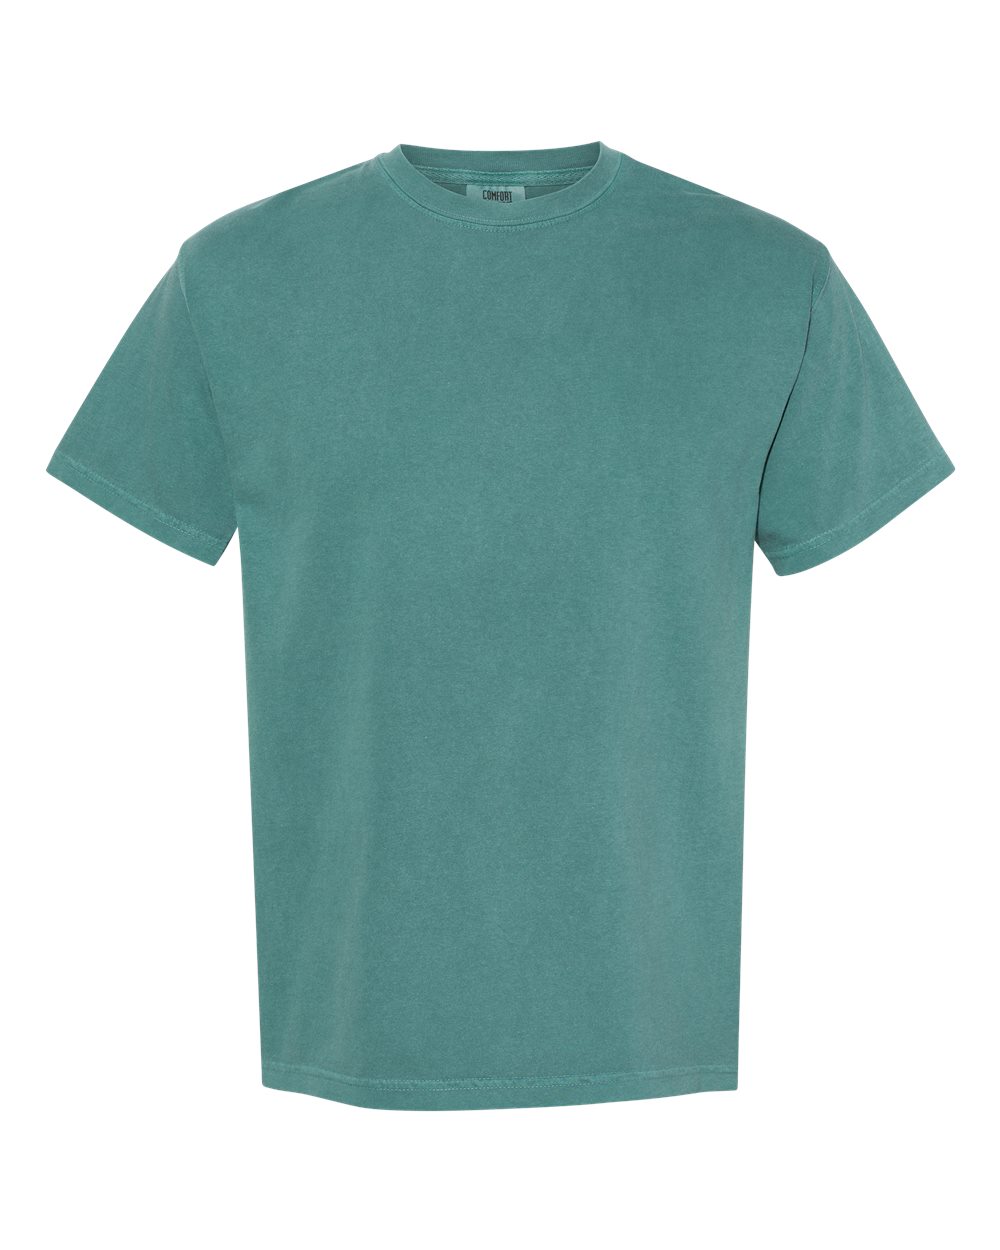 Comfort Colors Garment-Dyed Tee (1717) in Emerald